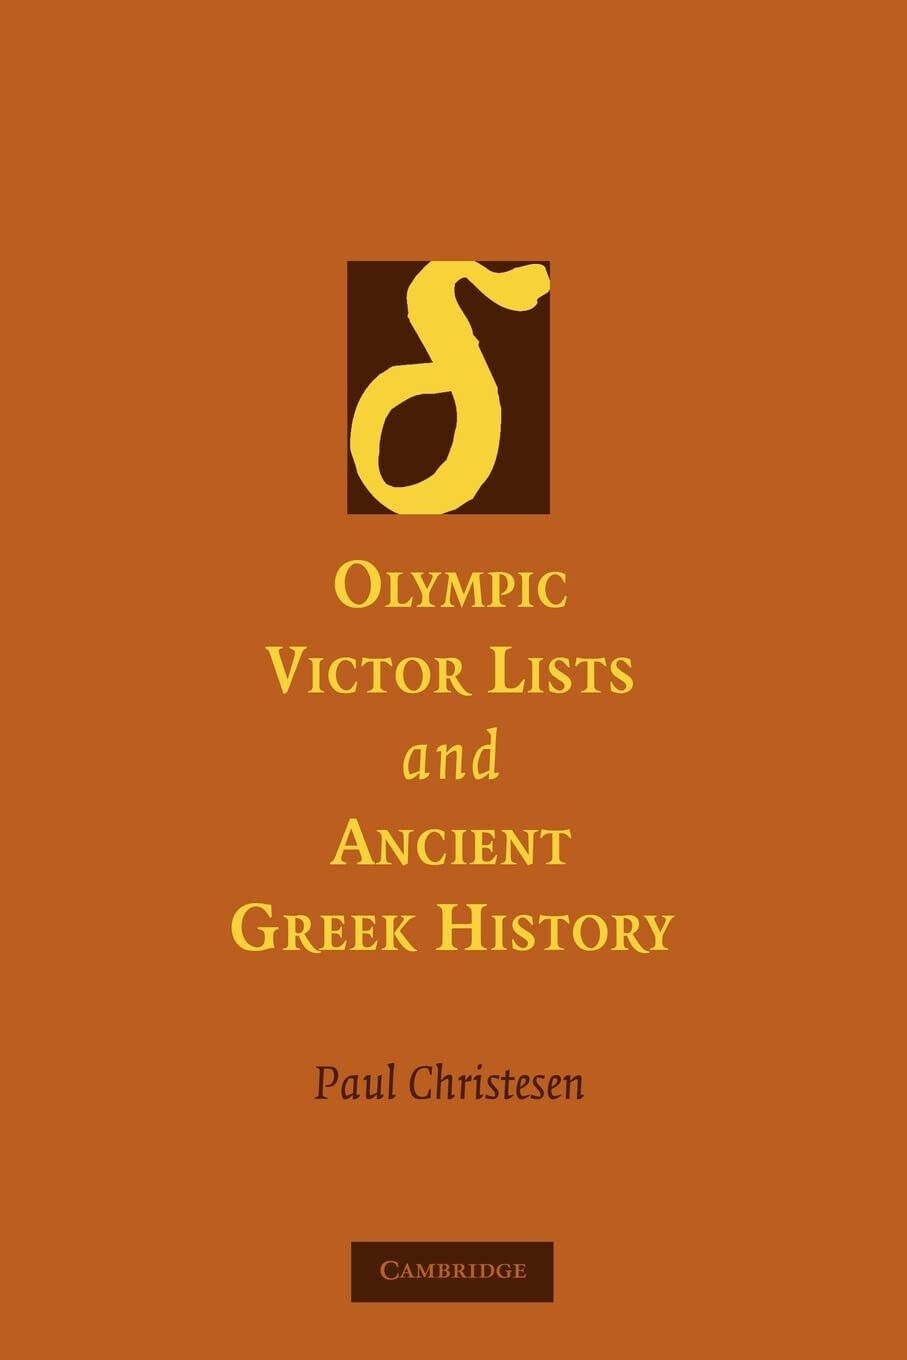 Olympic Victor Lists and Ancient Greek History - Paul Christesen - 2022